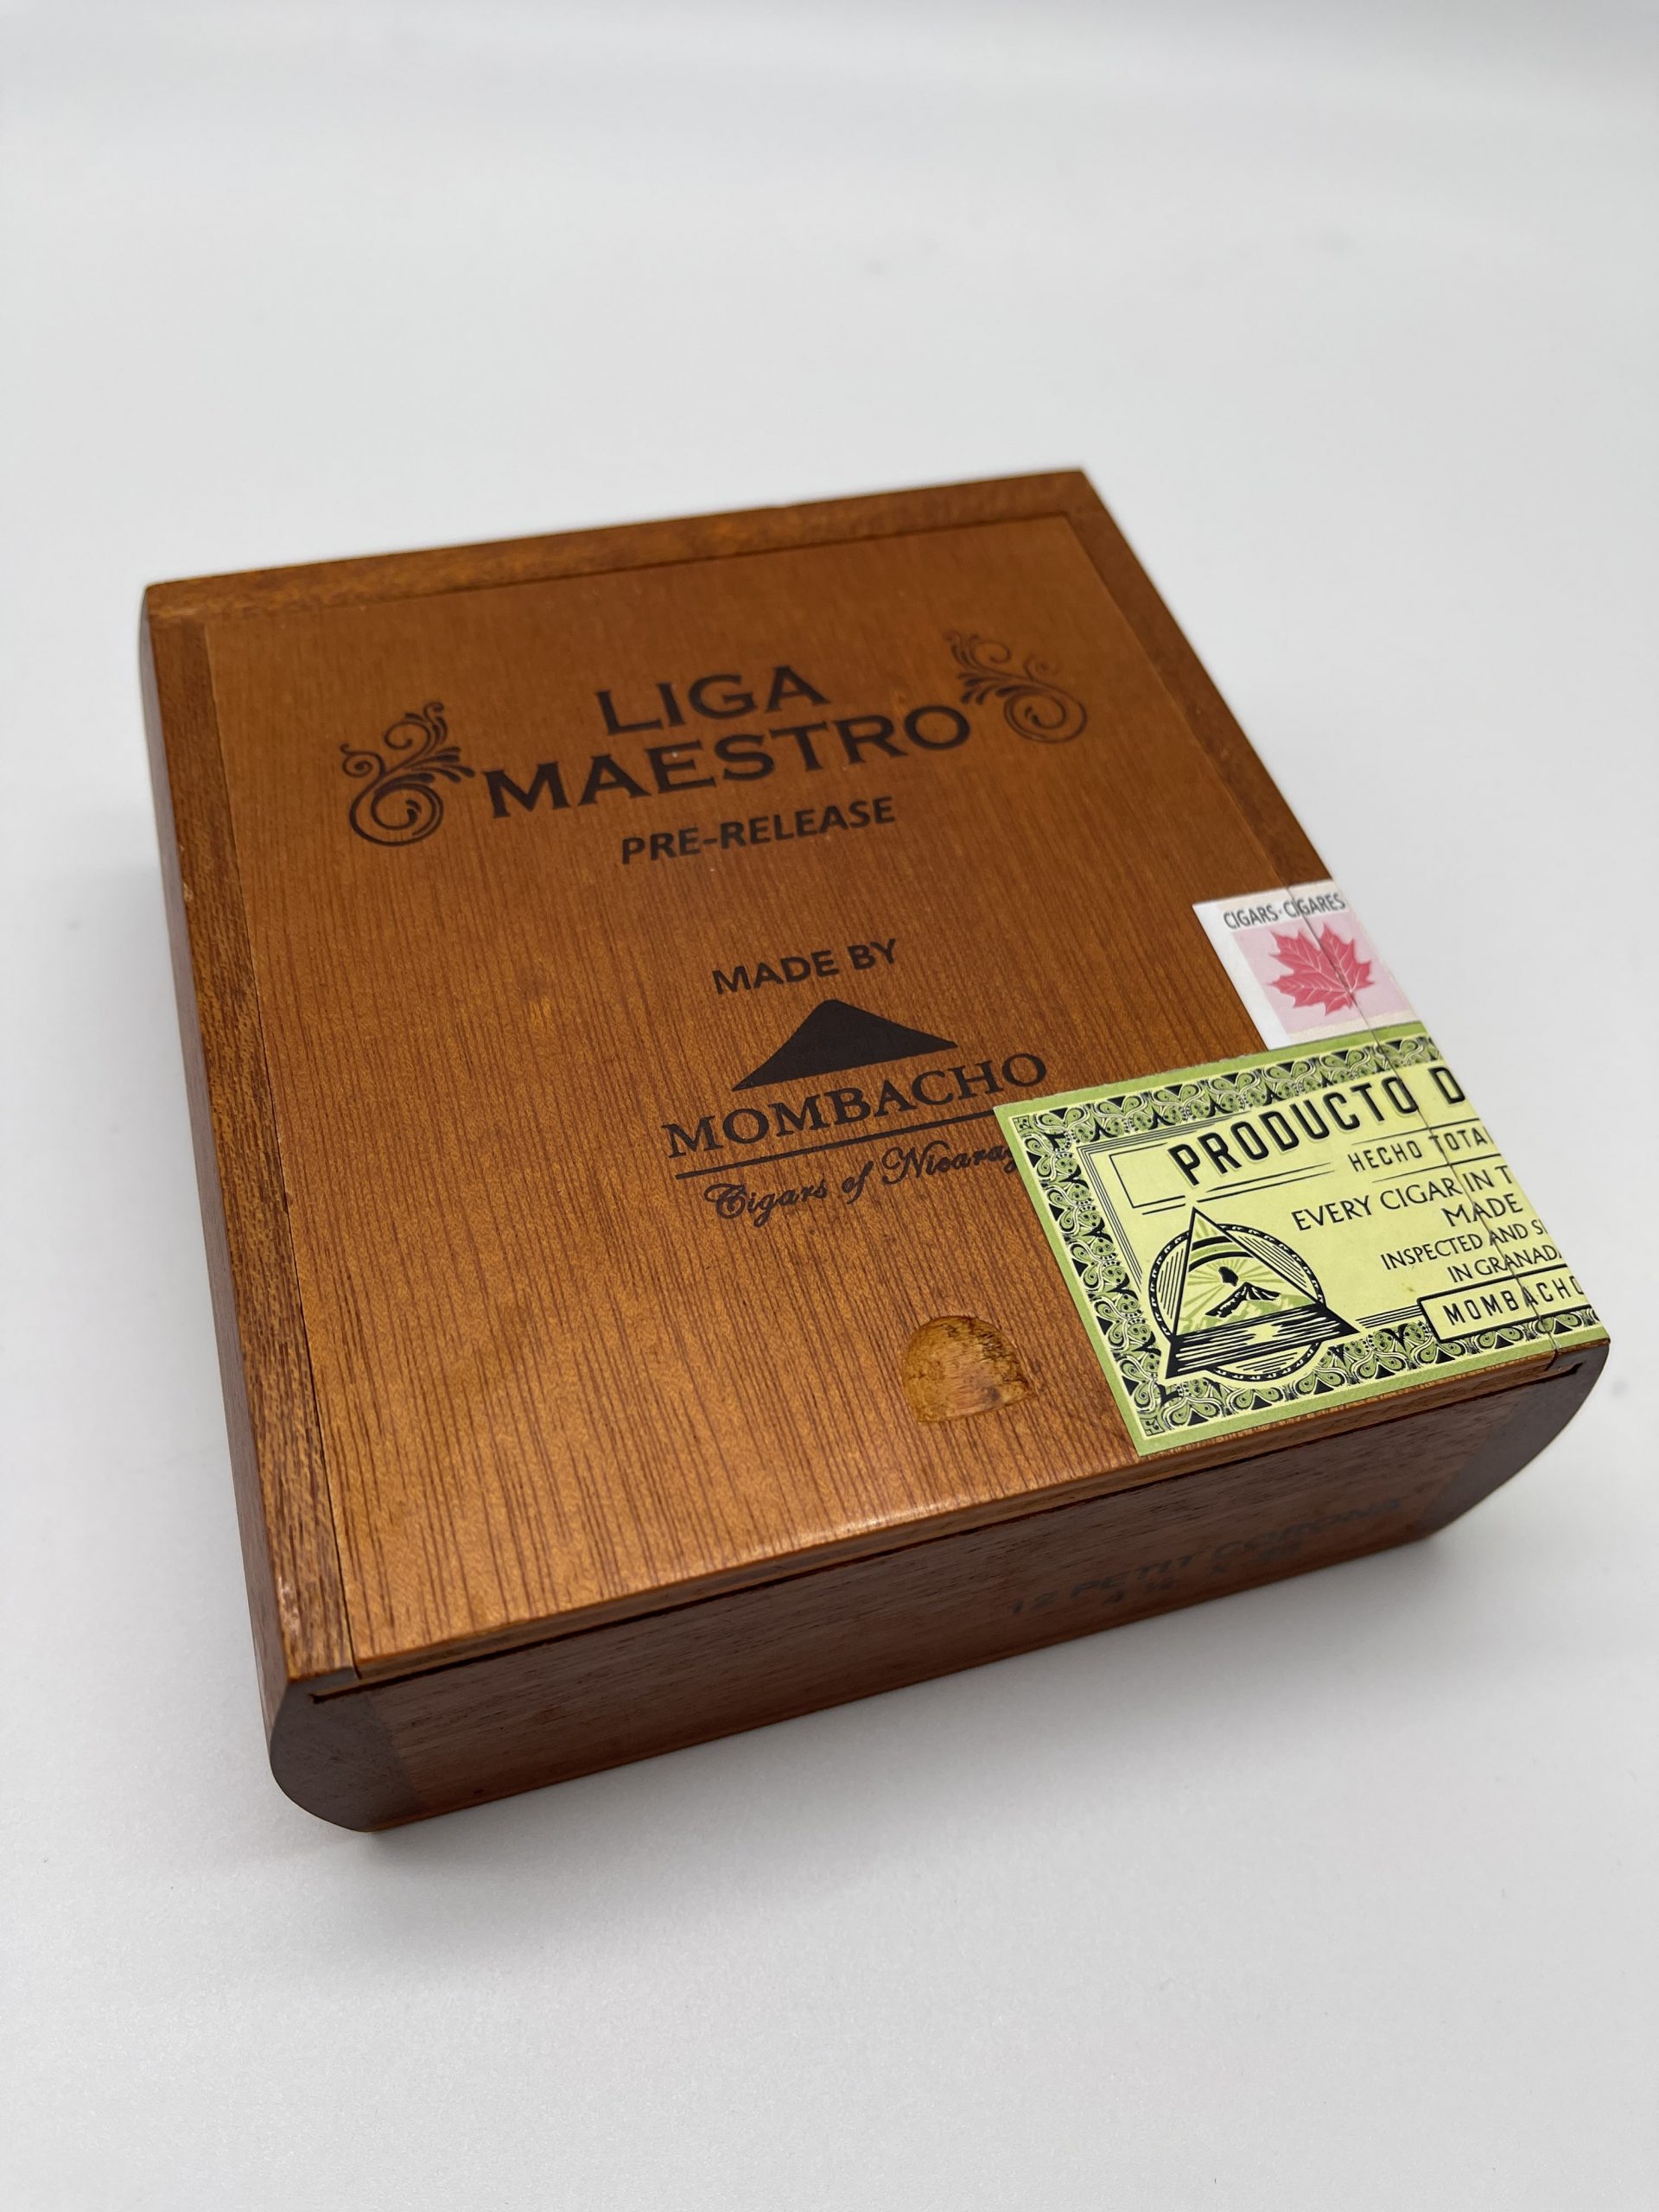 MOMBACHU LIGA MAESTRO (Pre Release 2013) Cigar Review by Chris LaPointe 1